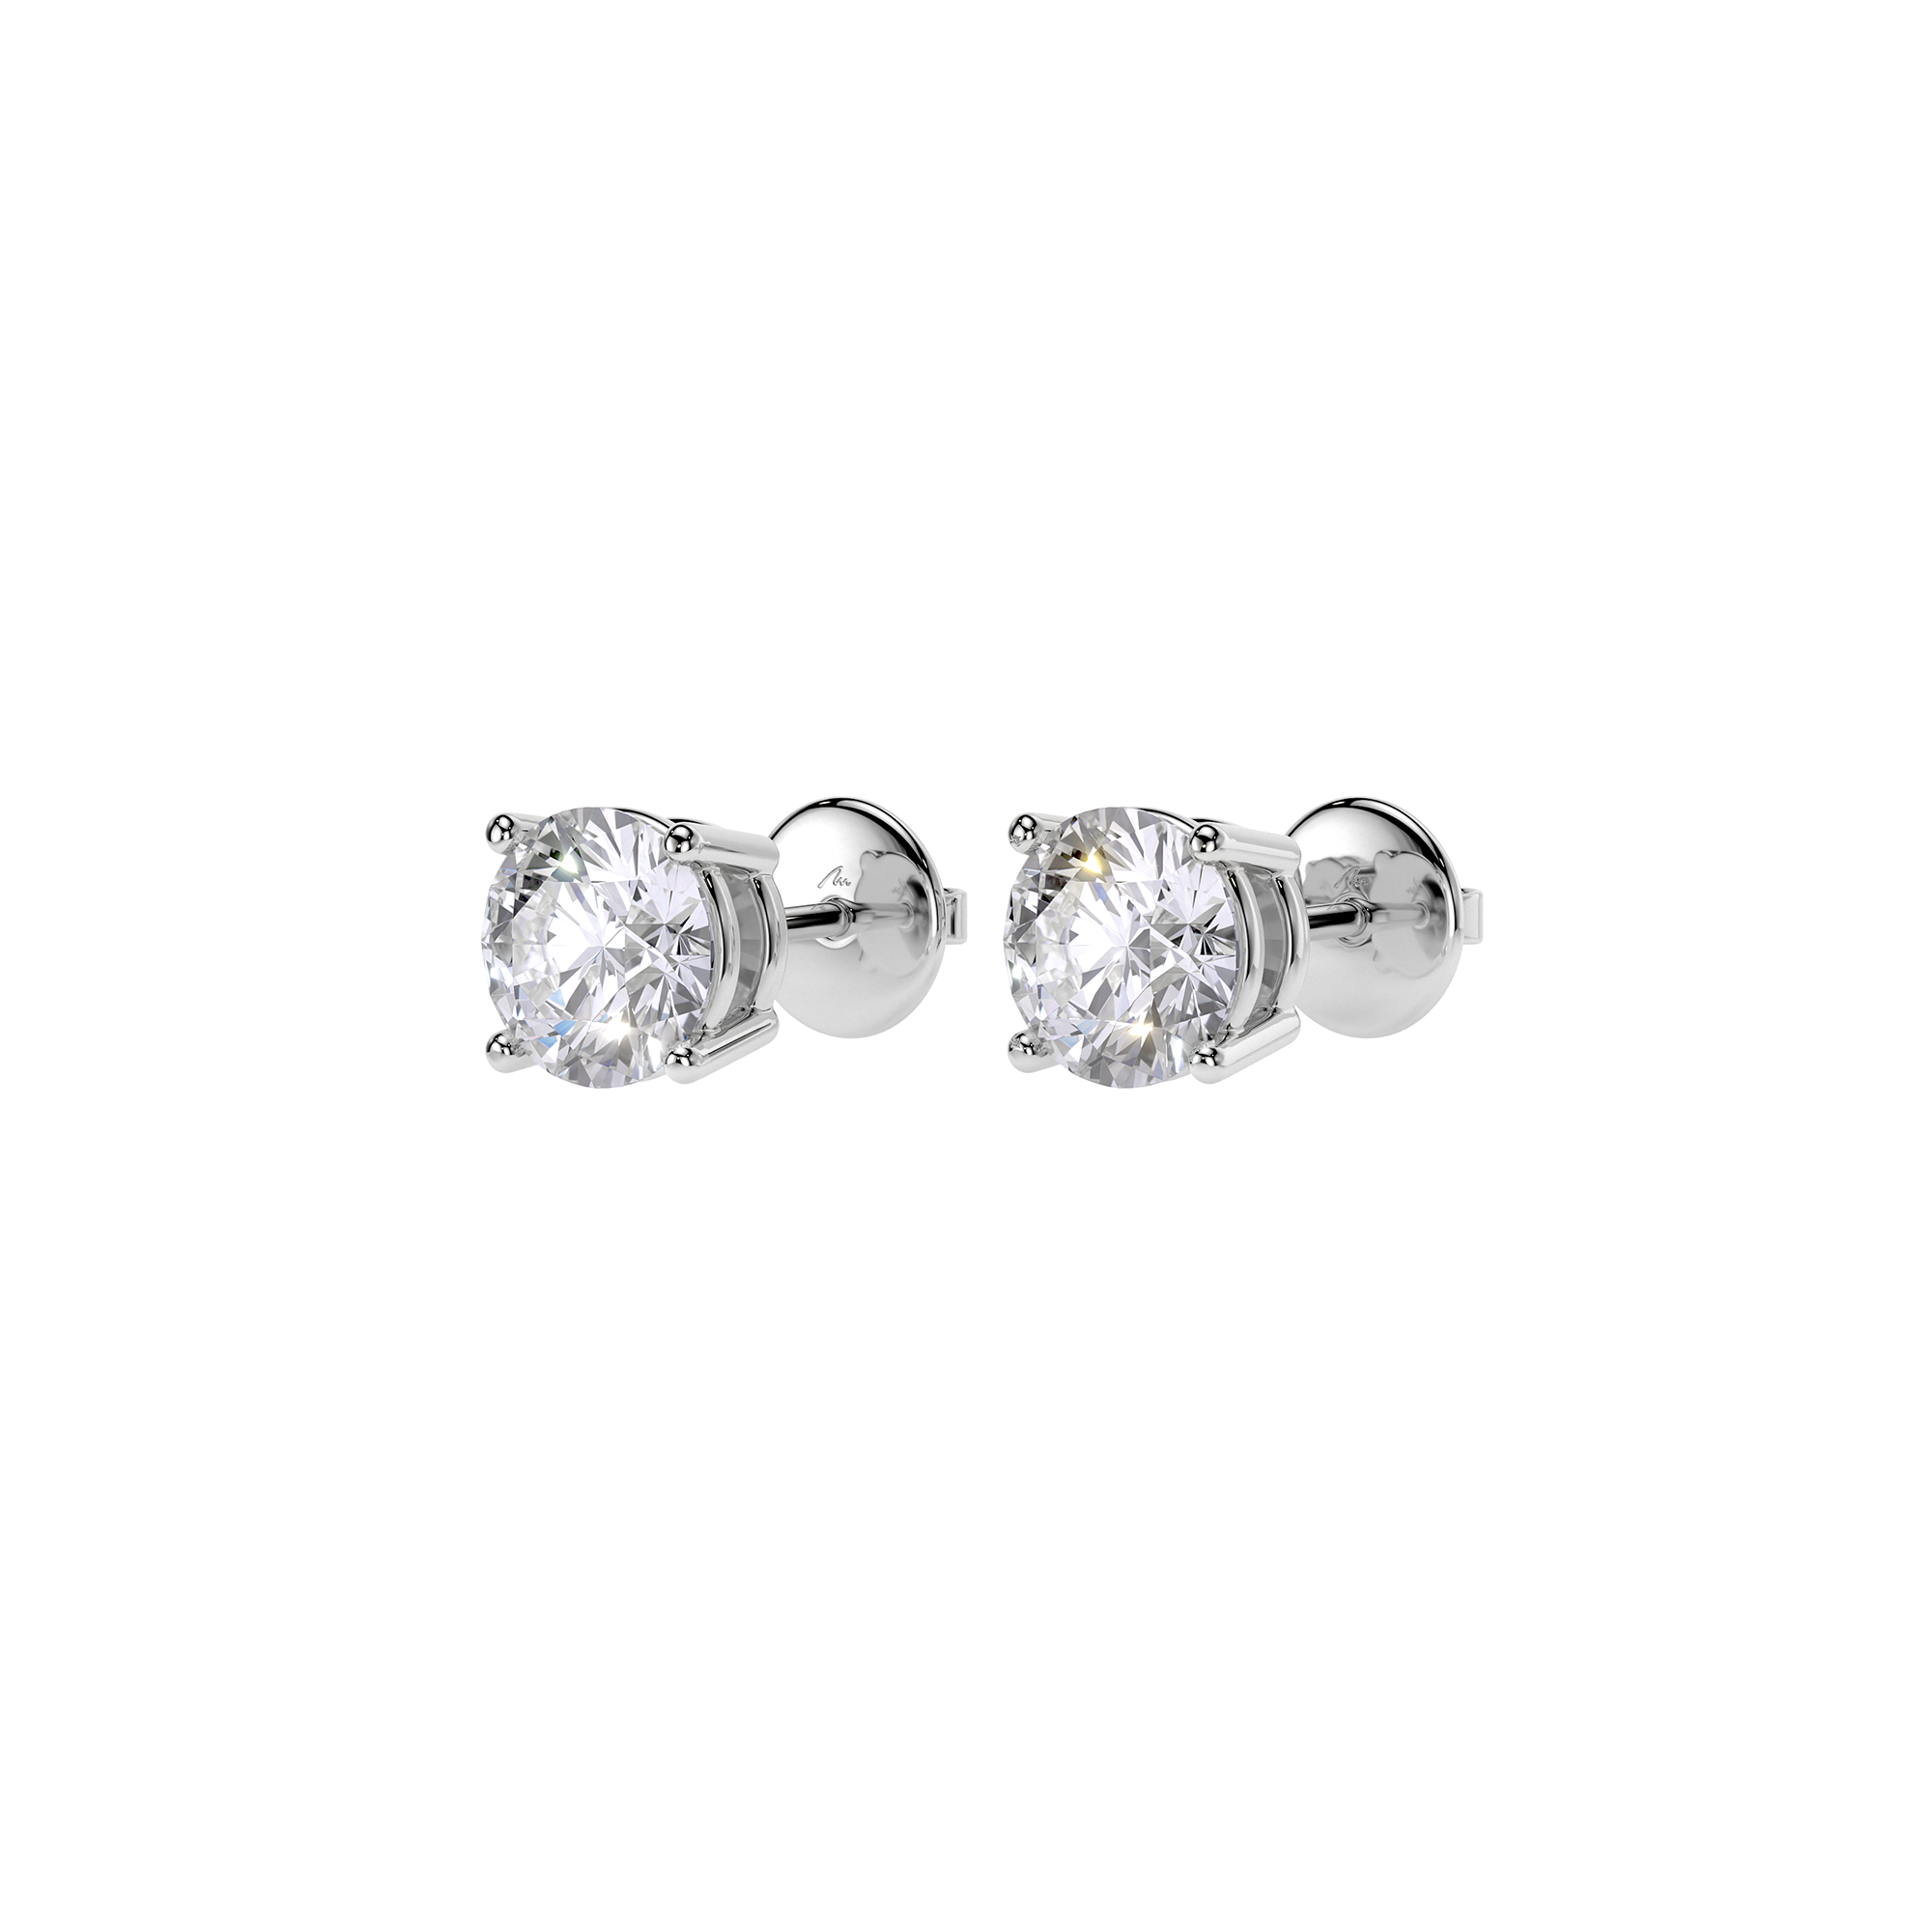 18 K white gold Studs earrings with 4.10 CT Lab Diamonds